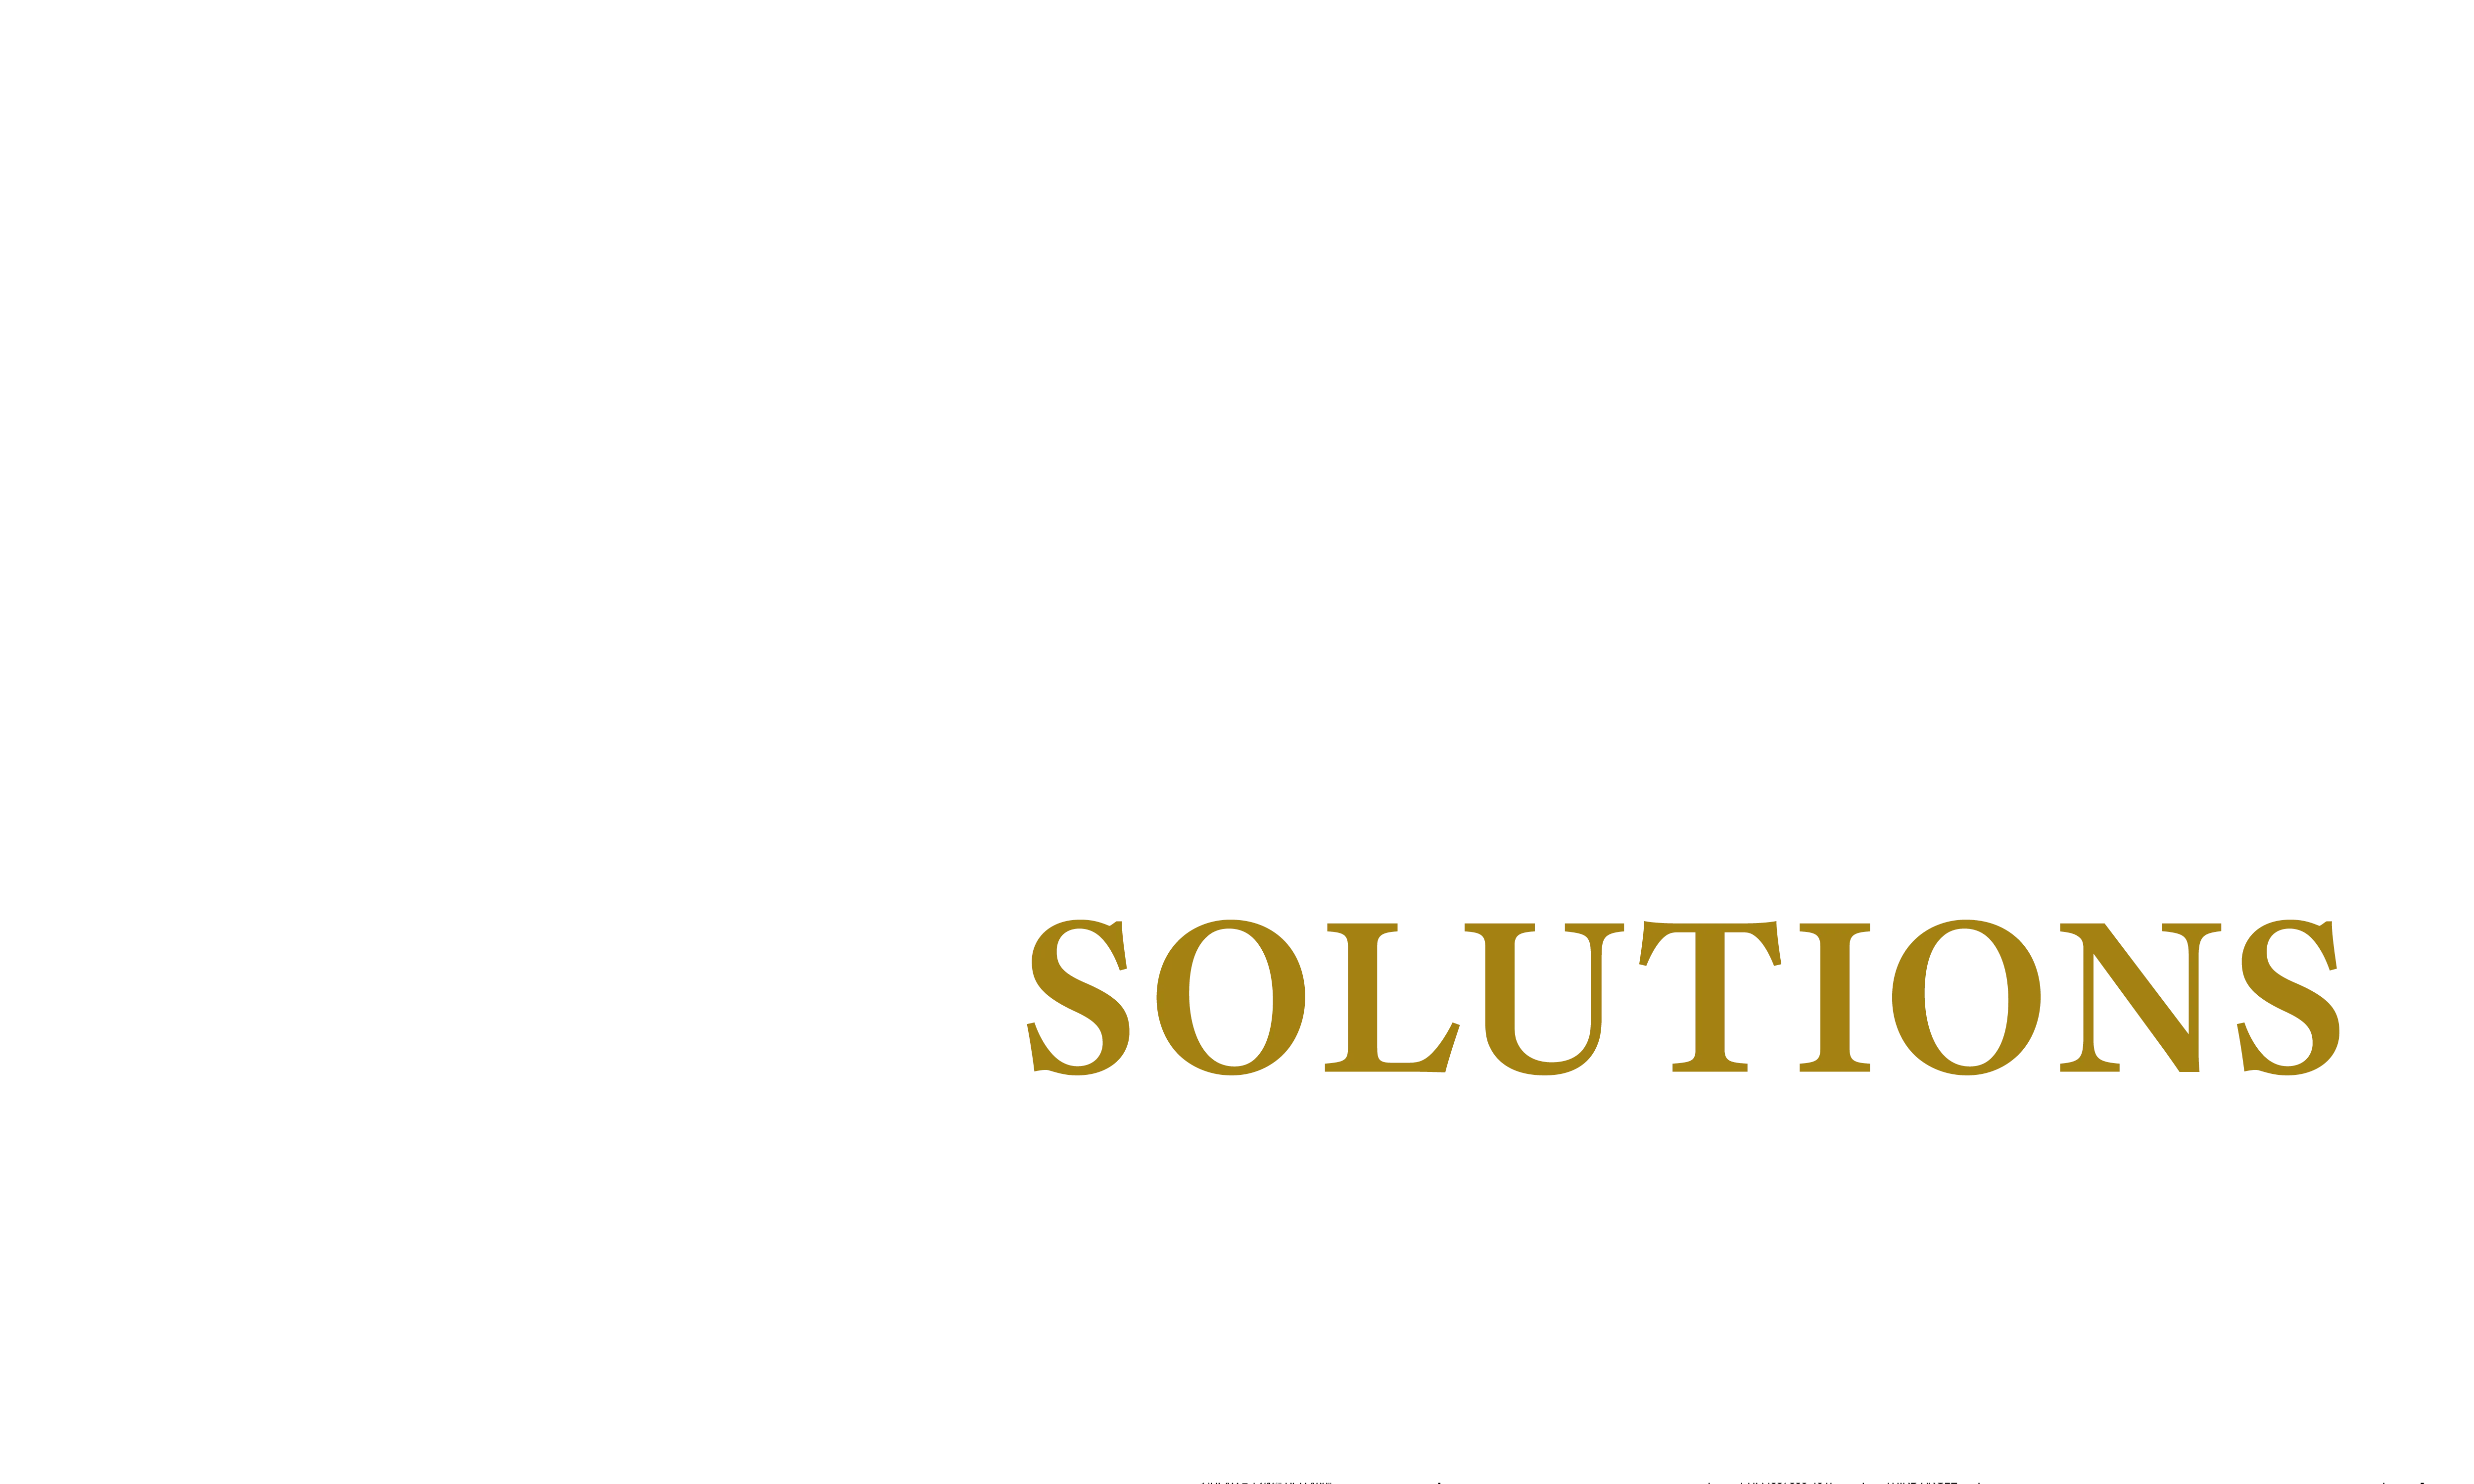 prairie solutions logo icon depicting a draft wheat kernel in white and gold